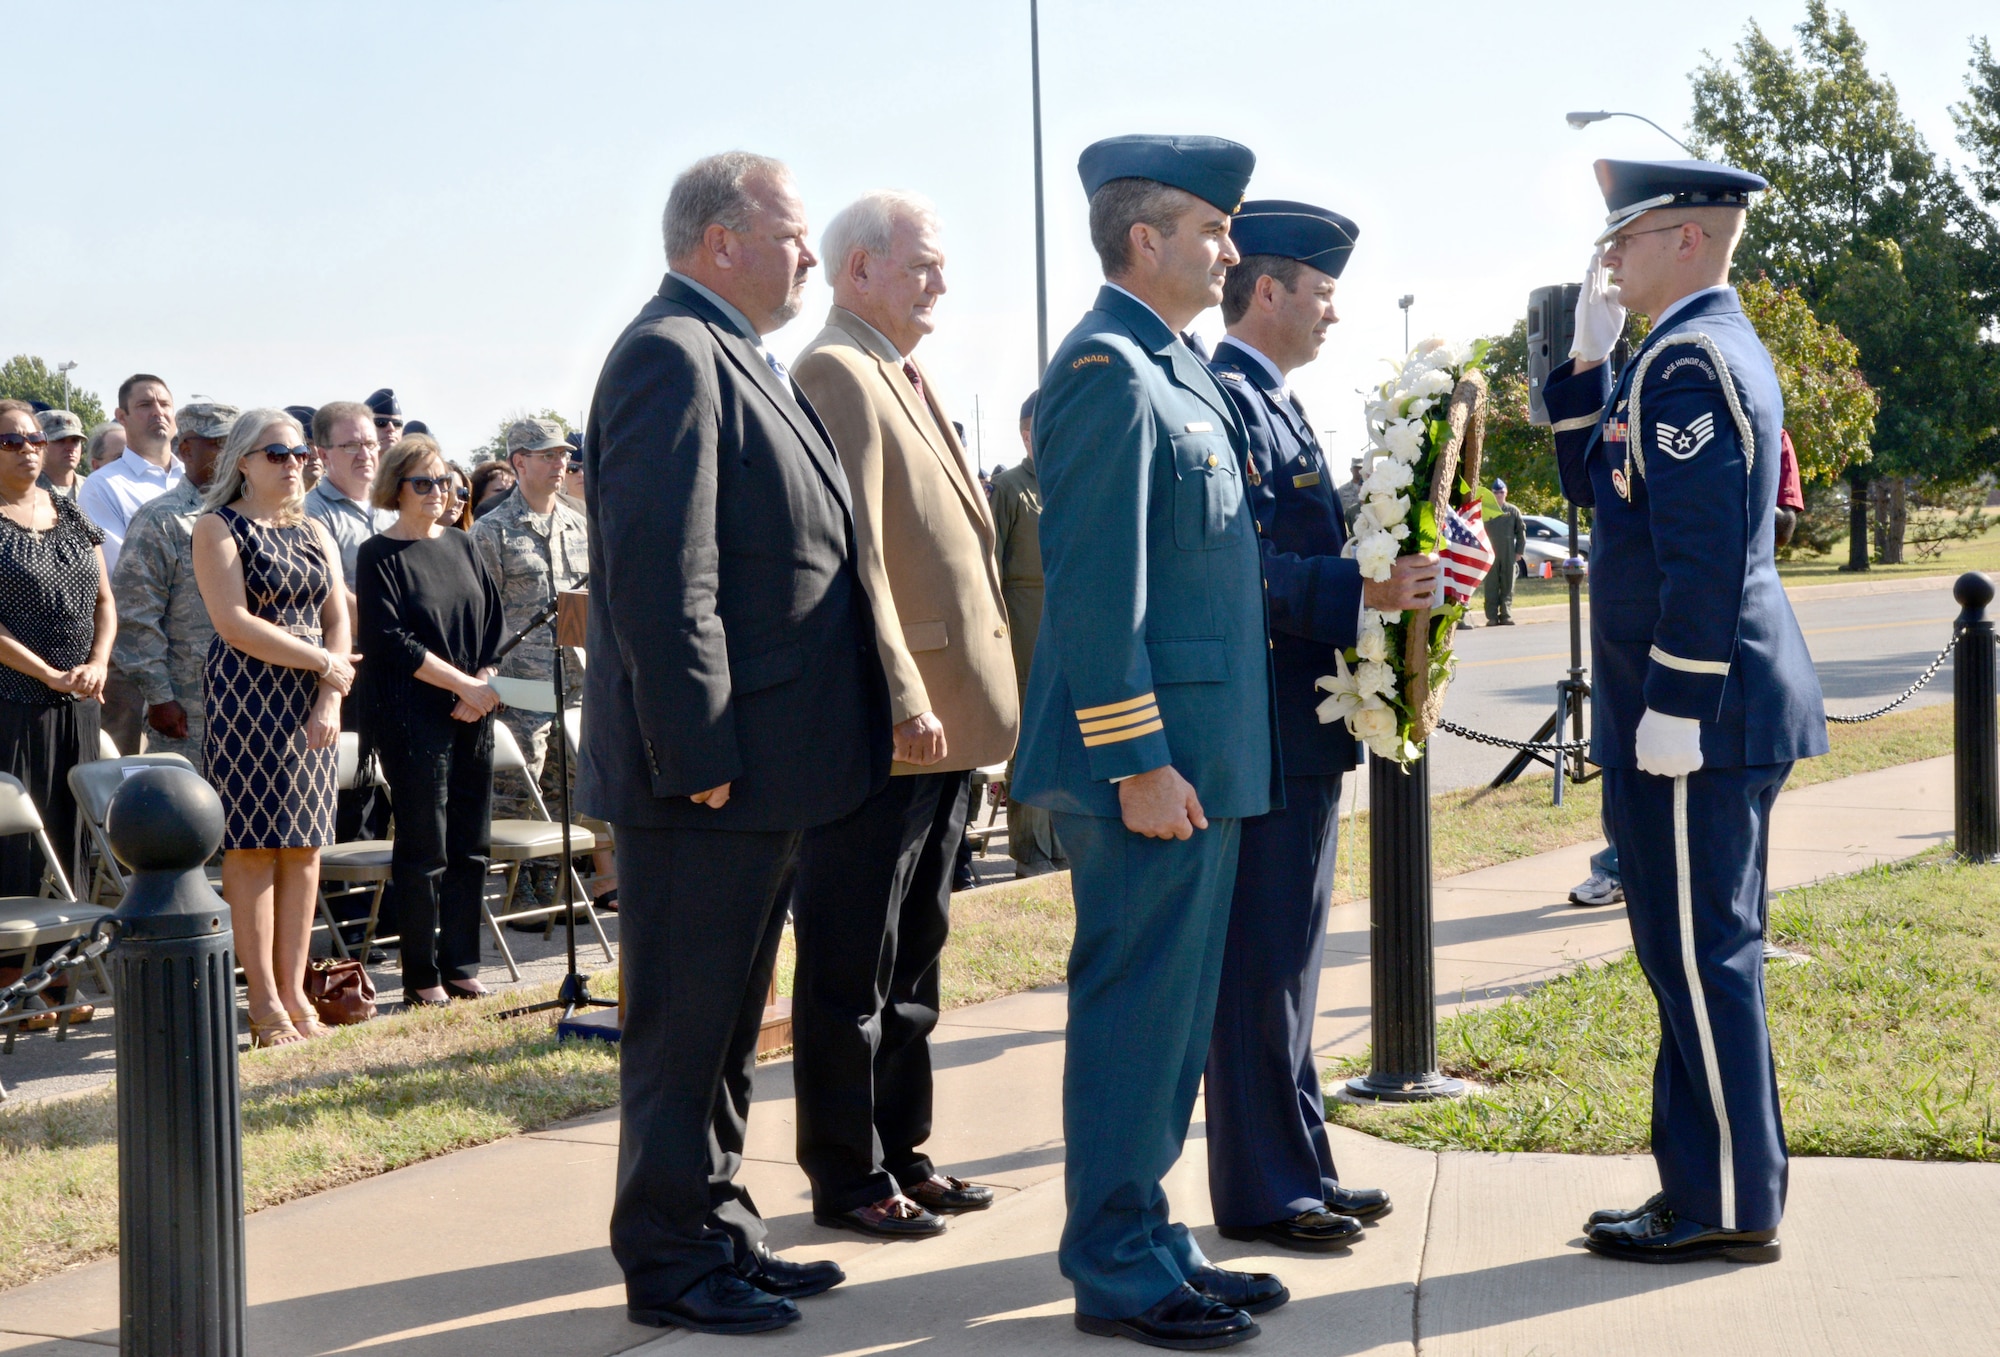 During a Sept. 22 ceremony, Col. David Gaedecke, 552nd Air Control Wing commander, receives a wreath from a member of Tinker’s Honor Guard to place at the foot of the Yukla 27 Memorial. Assisting with the wreath laying are, from left, retired Master Sgt. Ken Lybolt, who was the crew chief for the Yukla; retired Col. Wylie Koiner, former 552nd ACW commander; and Lt. Col. Don “Boc” Saunders, Canadian Detachment commander. The ceremony marked the 20th anniversary of “Yukla two-seven” crashing 42 seconds after takeoff at Elmendorf Air Force Base, Alaska, killing all 24 crew members onboard. (Air Force photo by Kelly White/Released)